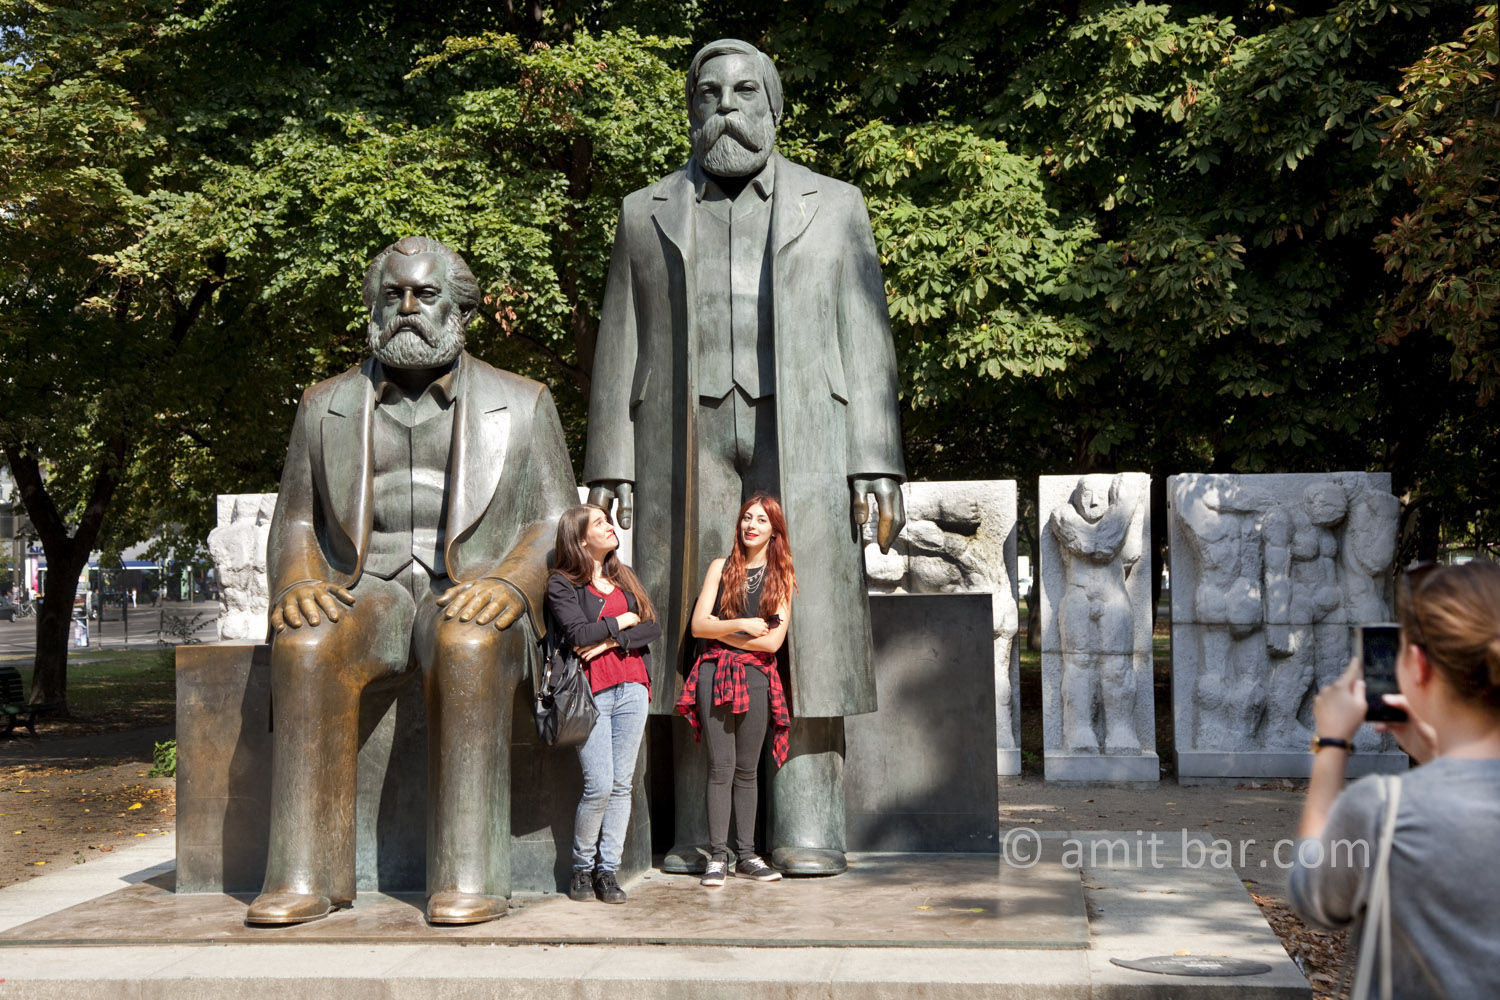 Berlin 2: The influence of Marx and Engels. Two girls beside the sculptures of Marx and Engels